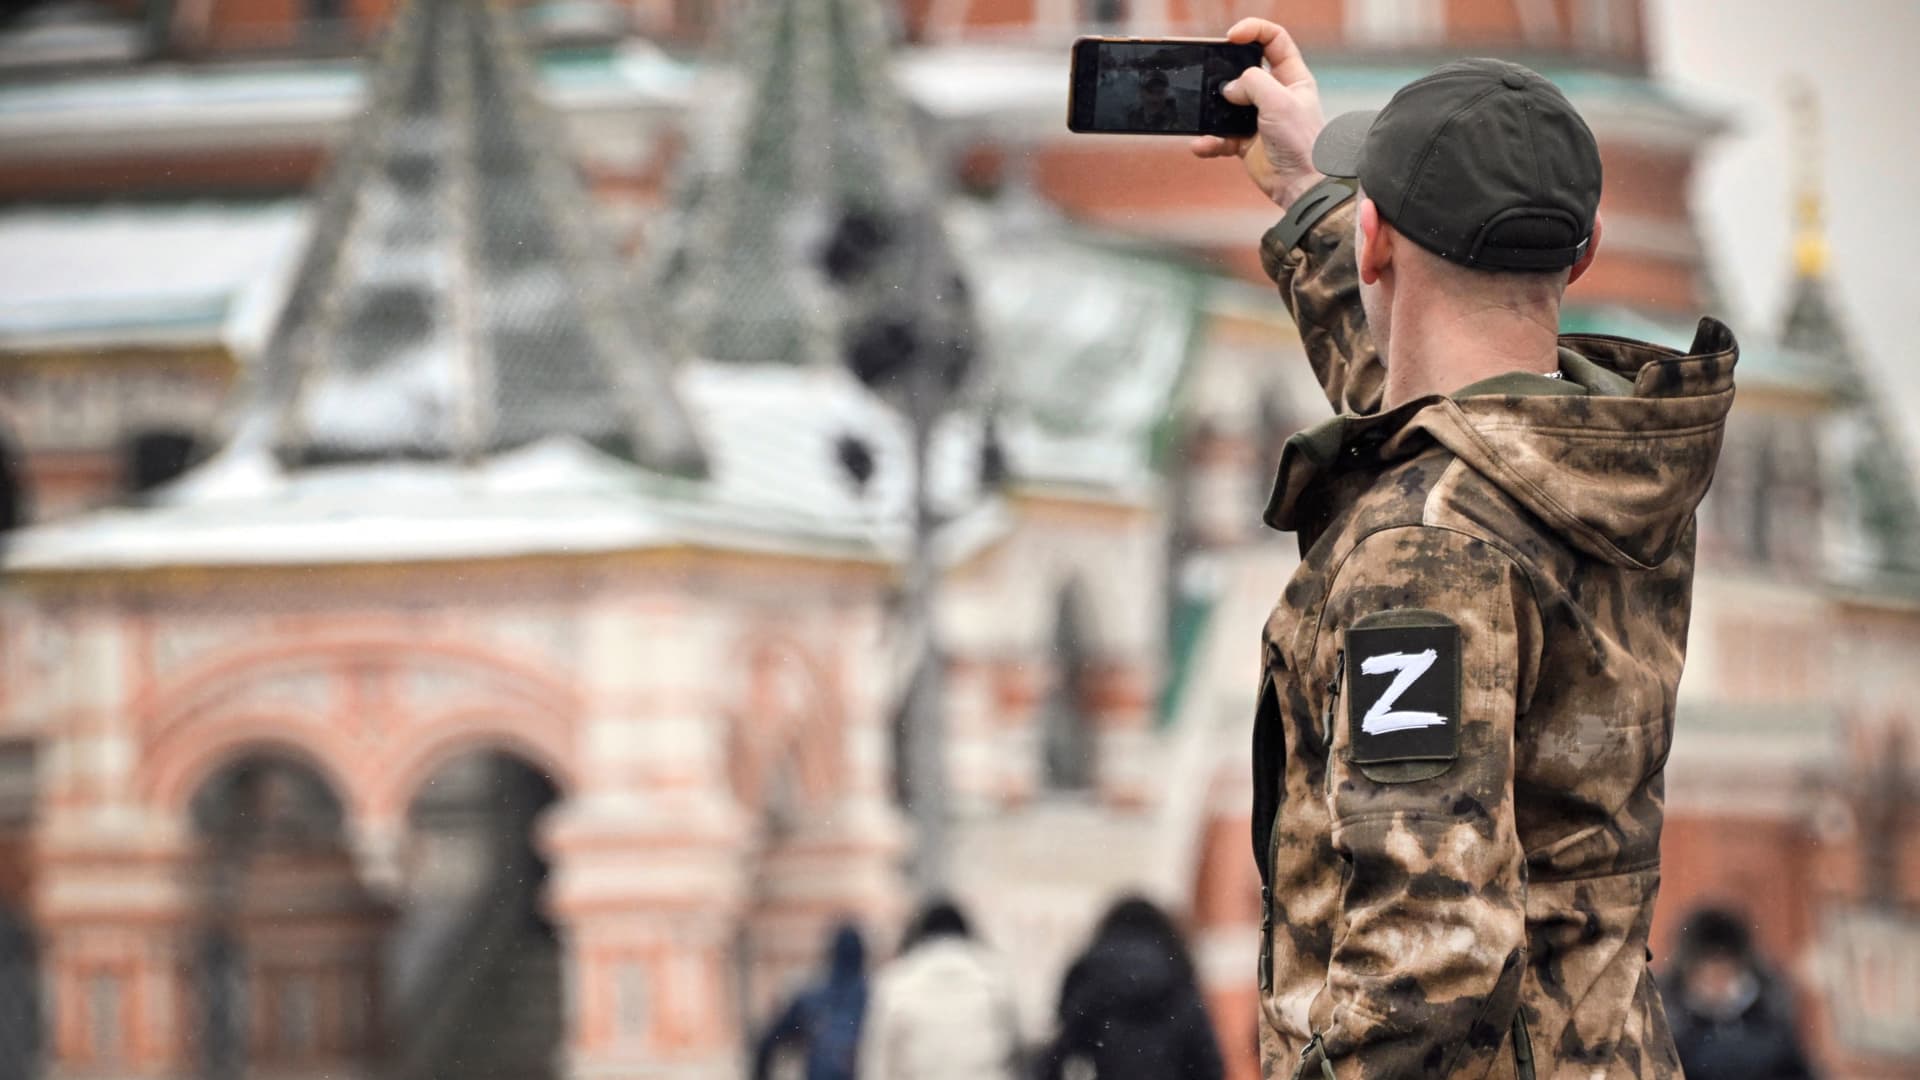 A man wearing military uniform with a Z letter, a tactical insignia of Russian troops in Ukraine, makes a selfie photo at Red Square in front of St. Basil's Cathedral in central Moscow on February 13, 2023.